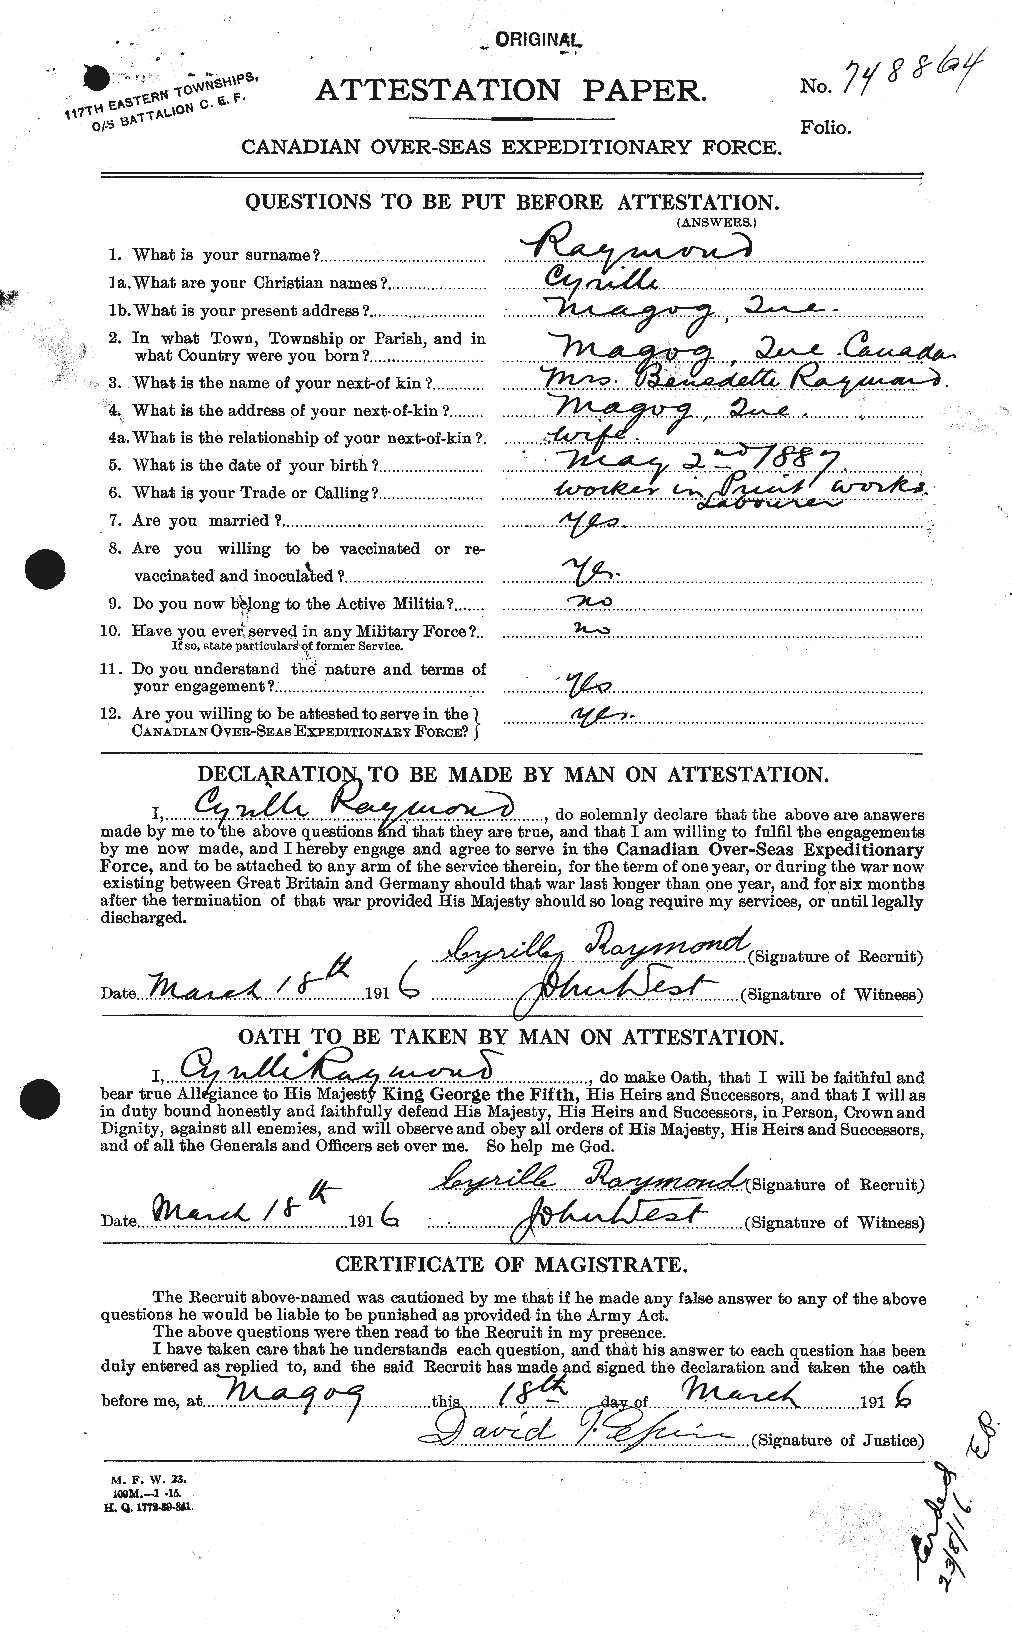 Personnel Records of the First World War - CEF 595288a